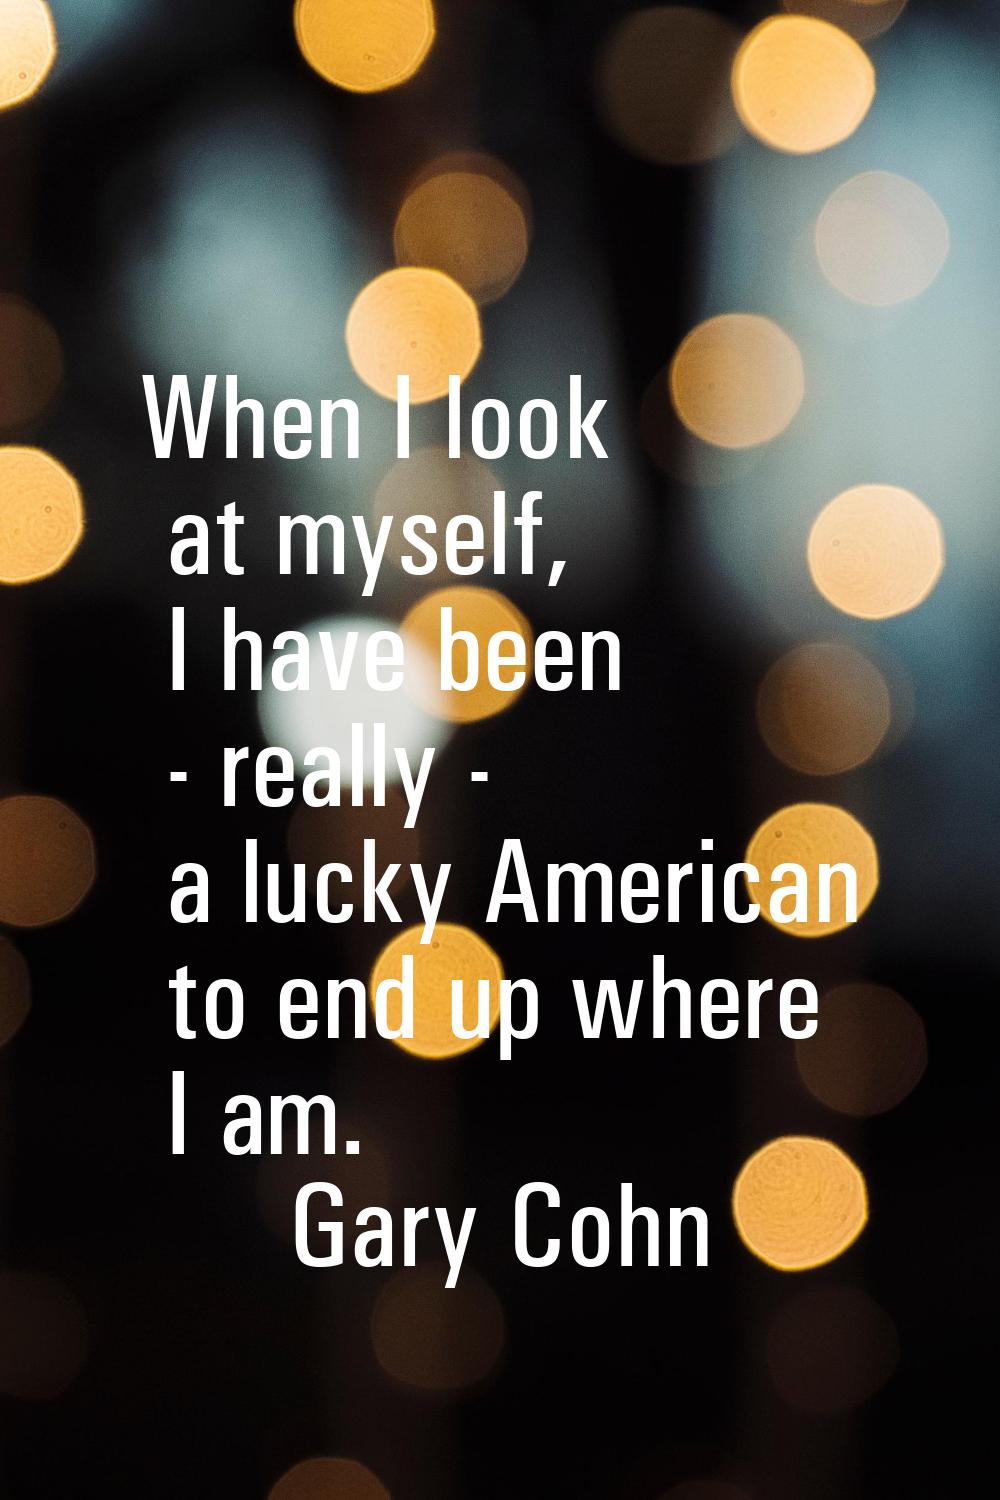 When I look at myself, I have been - really - a lucky American to end up where I am.